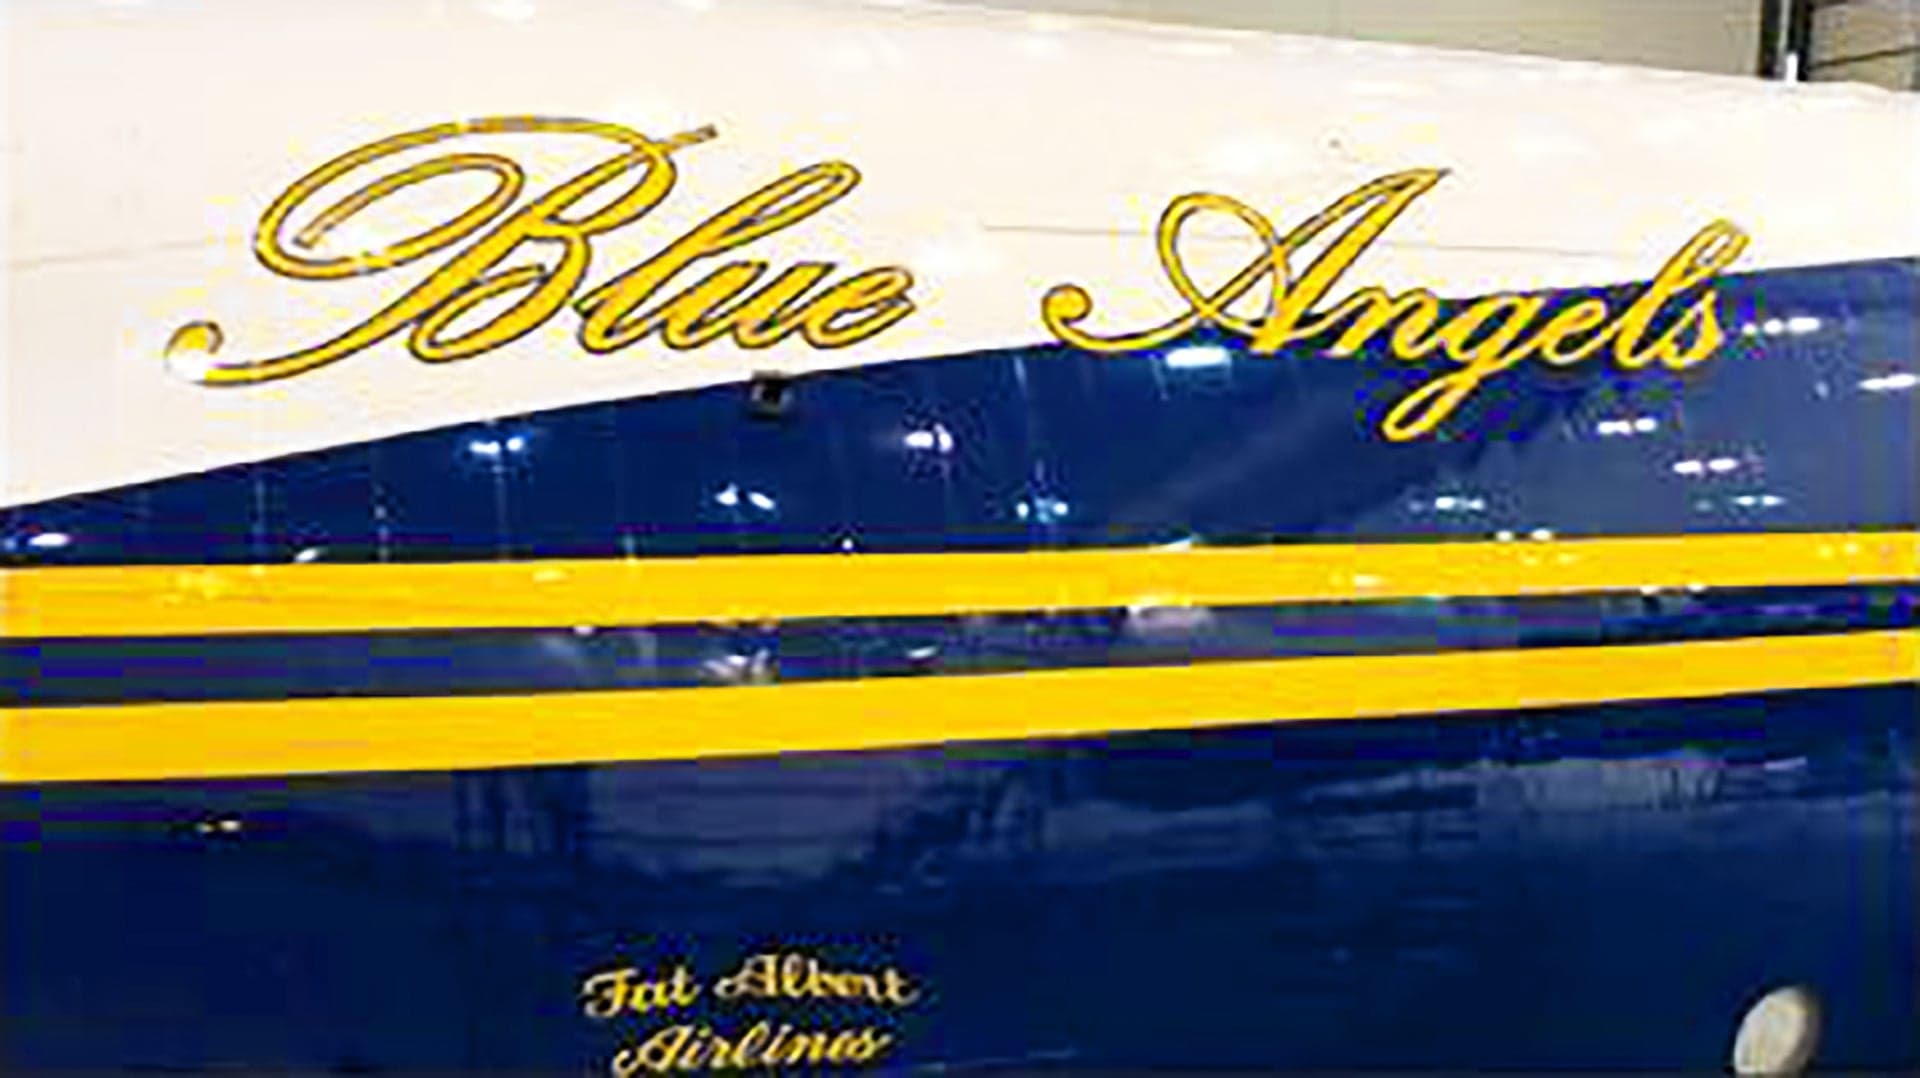 Blue Angels’ New Fat Albert C-130 To Debut This Spring, Updated Paint Scheme Teased (Updated)